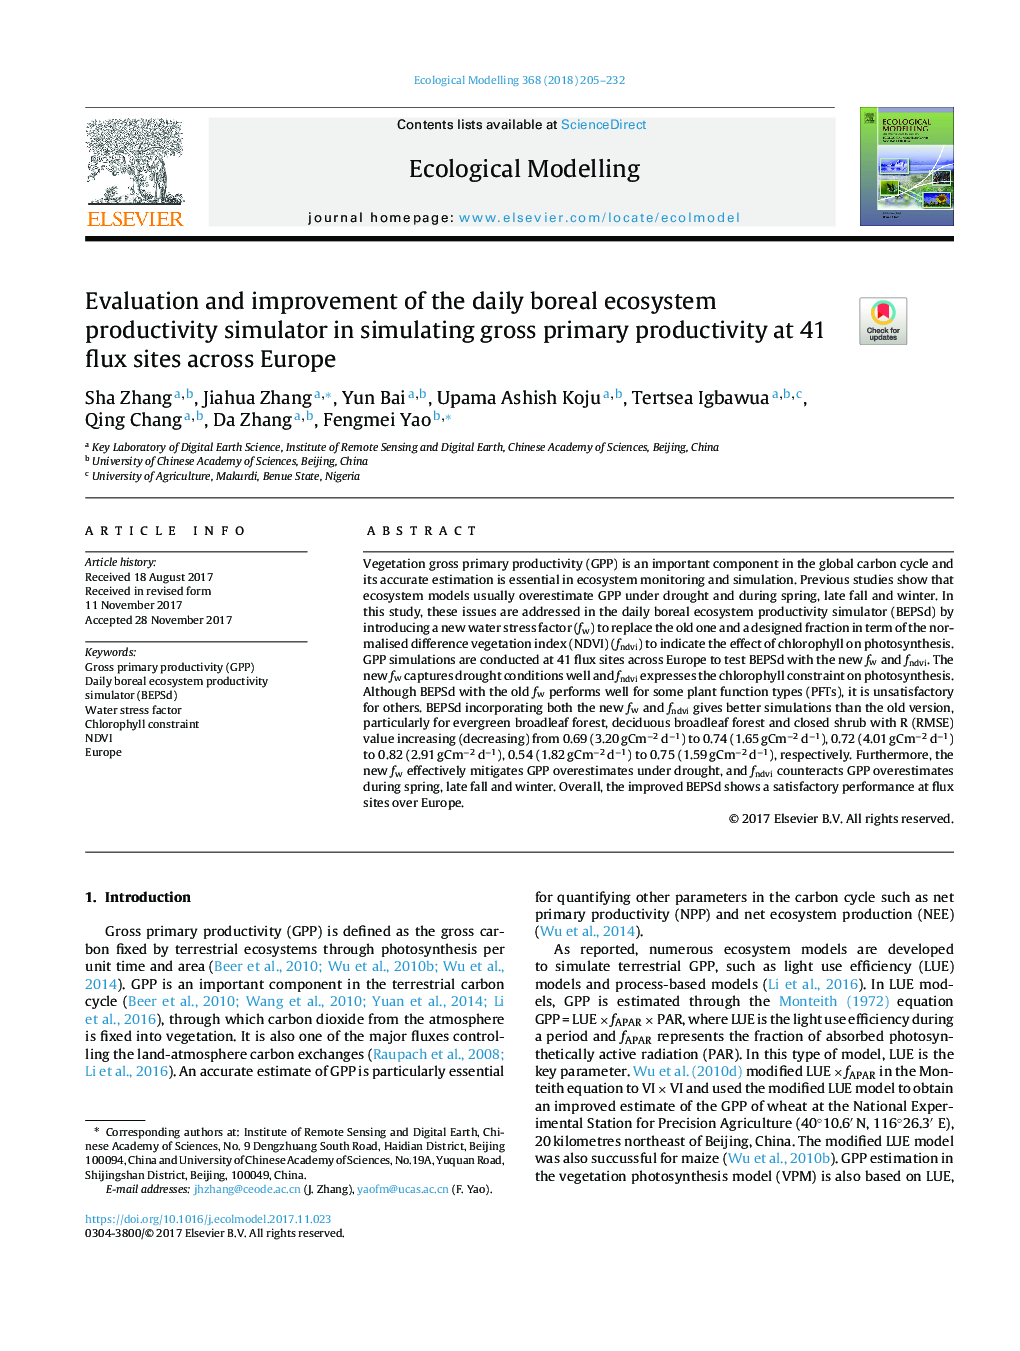 Evaluation and improvement of the daily boreal ecosystem productivity simulator in simulating gross primary productivity at 41 flux sites across Europe